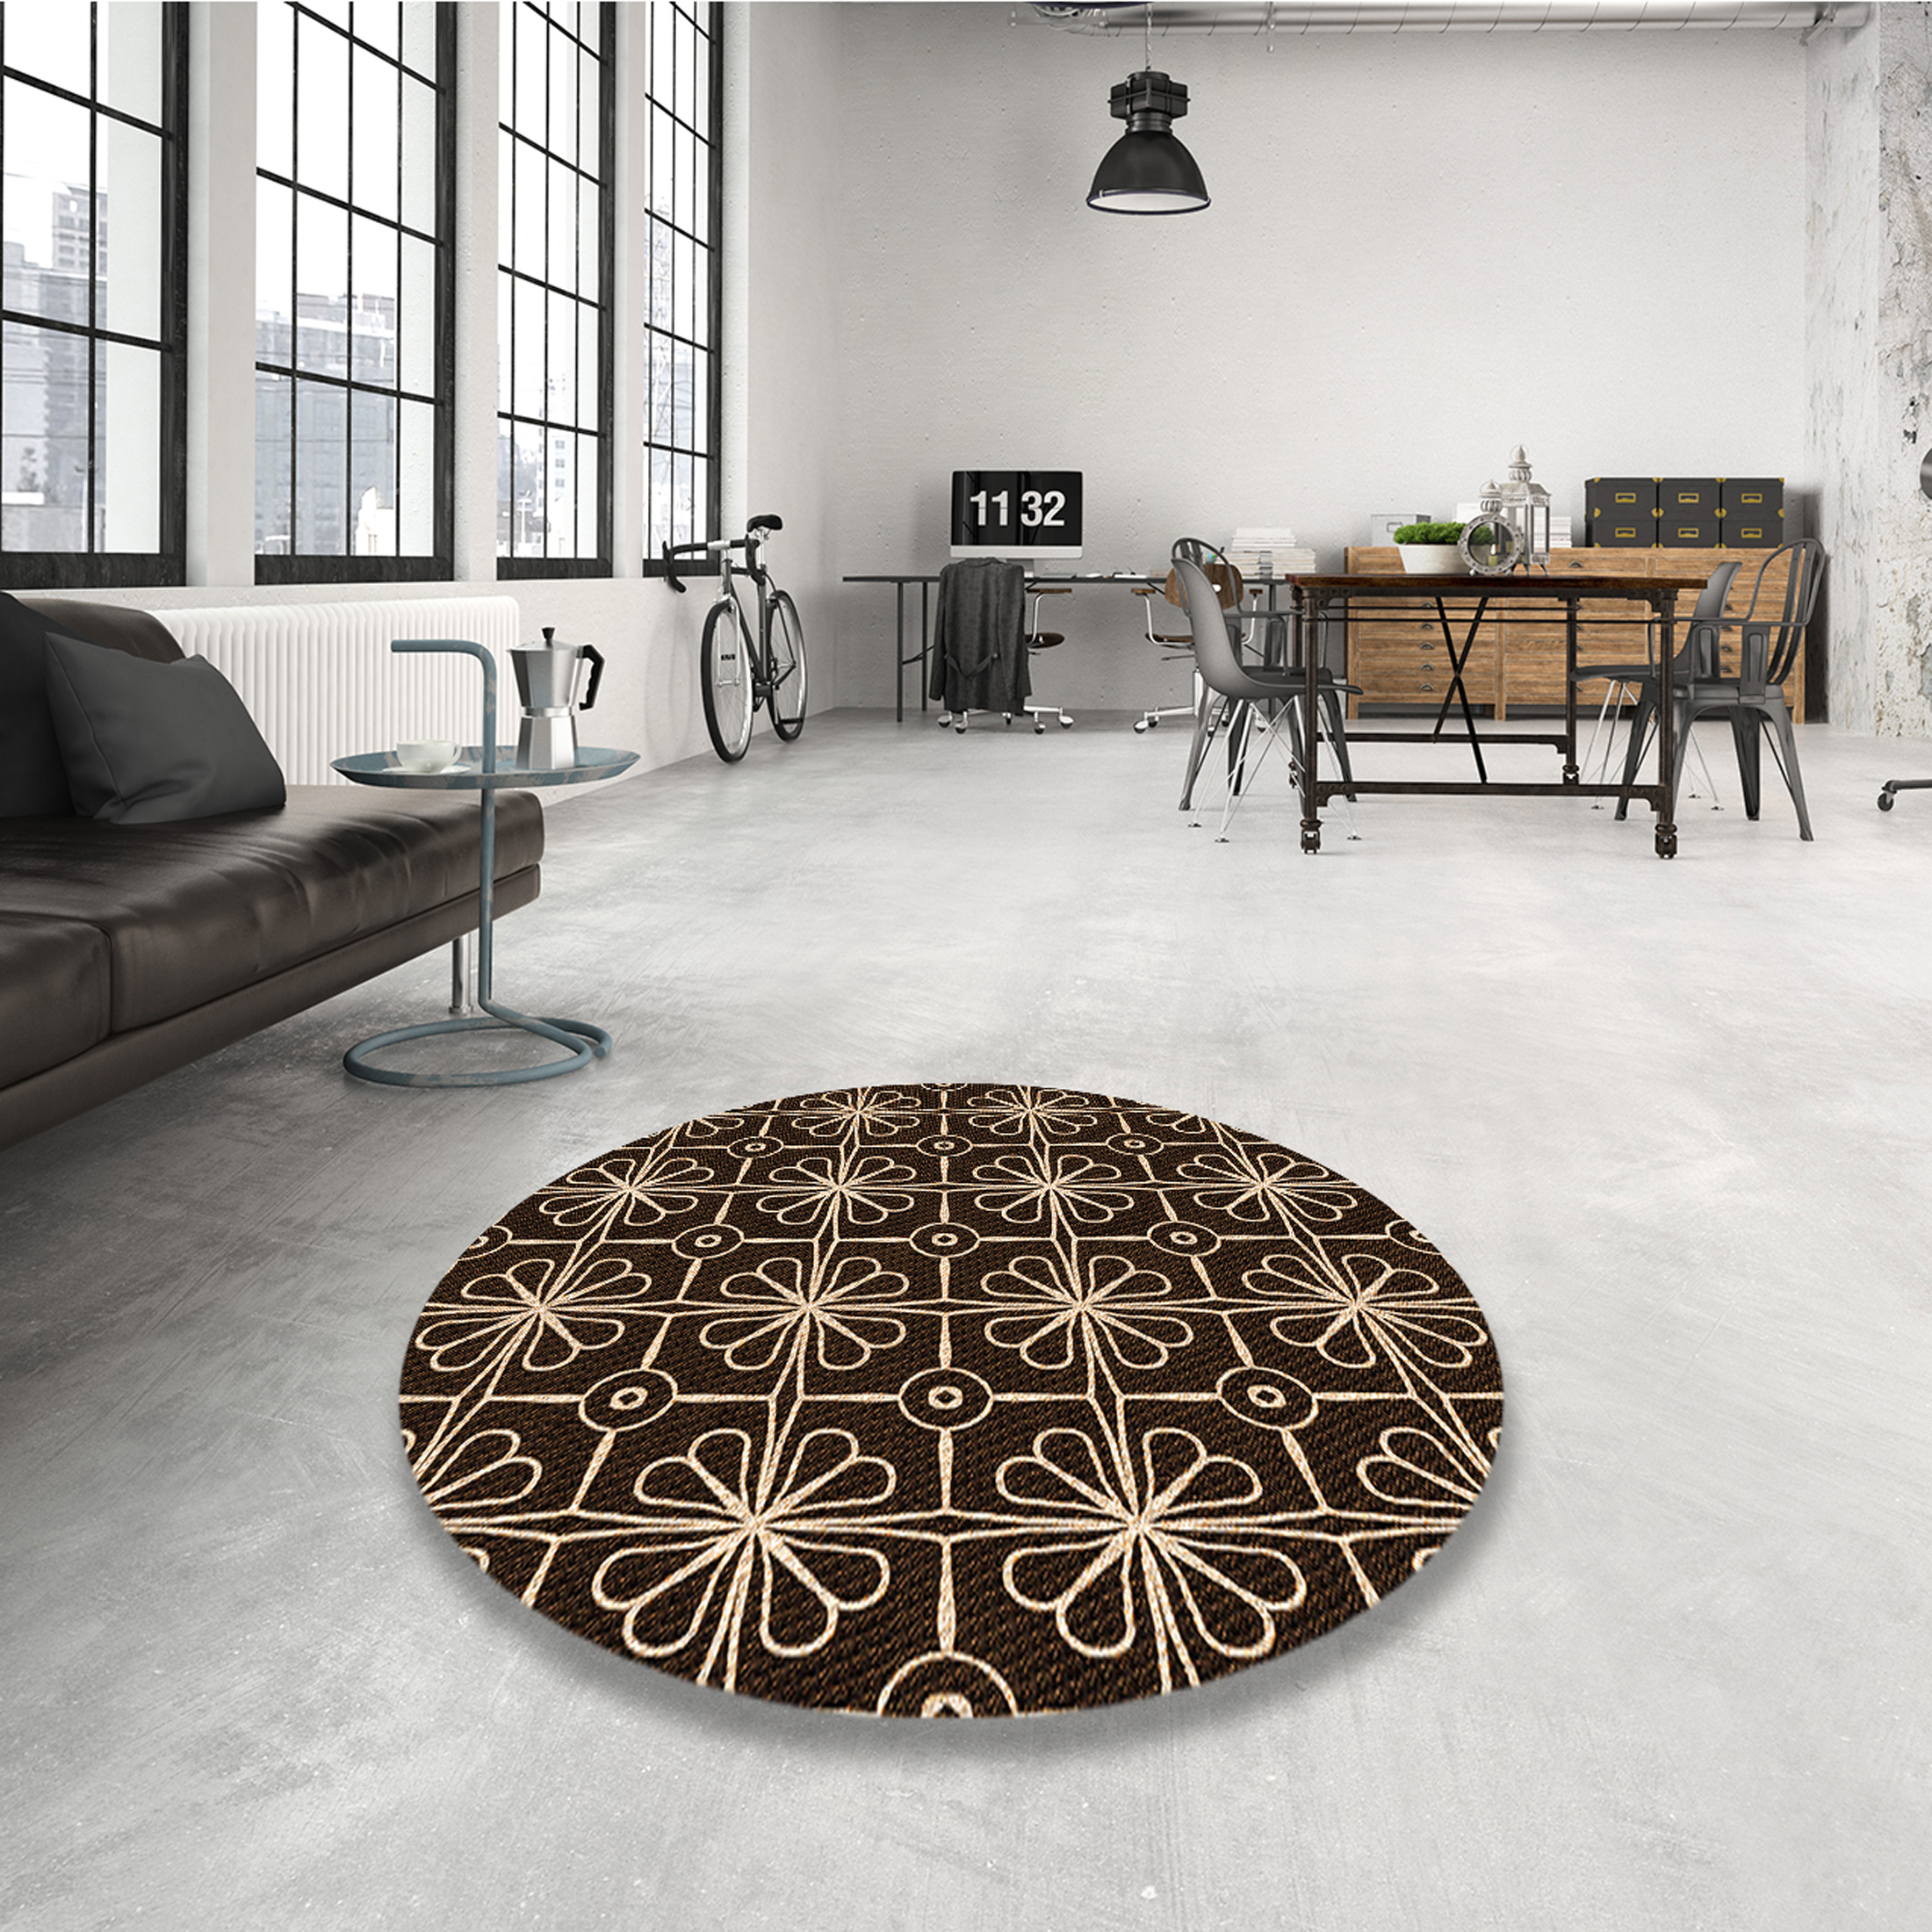 Ahgly Company Indoor Rectangle Patterned Black Bean Brown Area Rugs, 7' x 10' - image 3 of 6